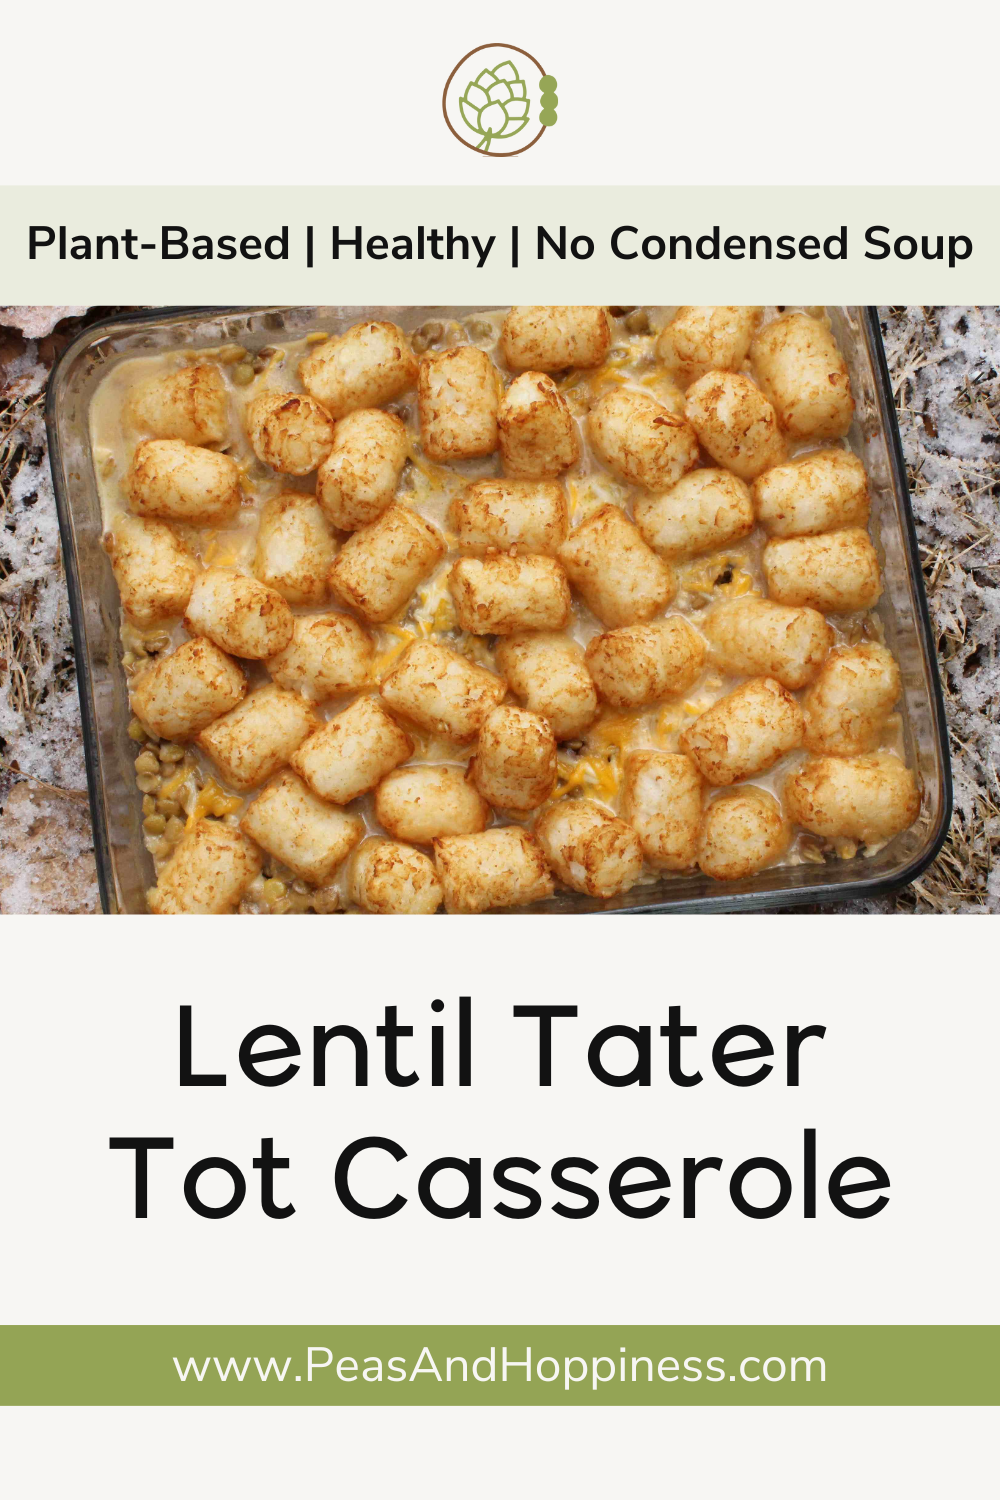 Healthy Vegetarian Recipe for Lentil Tater Tot Casserole - Gluten-Free Dairy-Free - Peas and Hoppiness